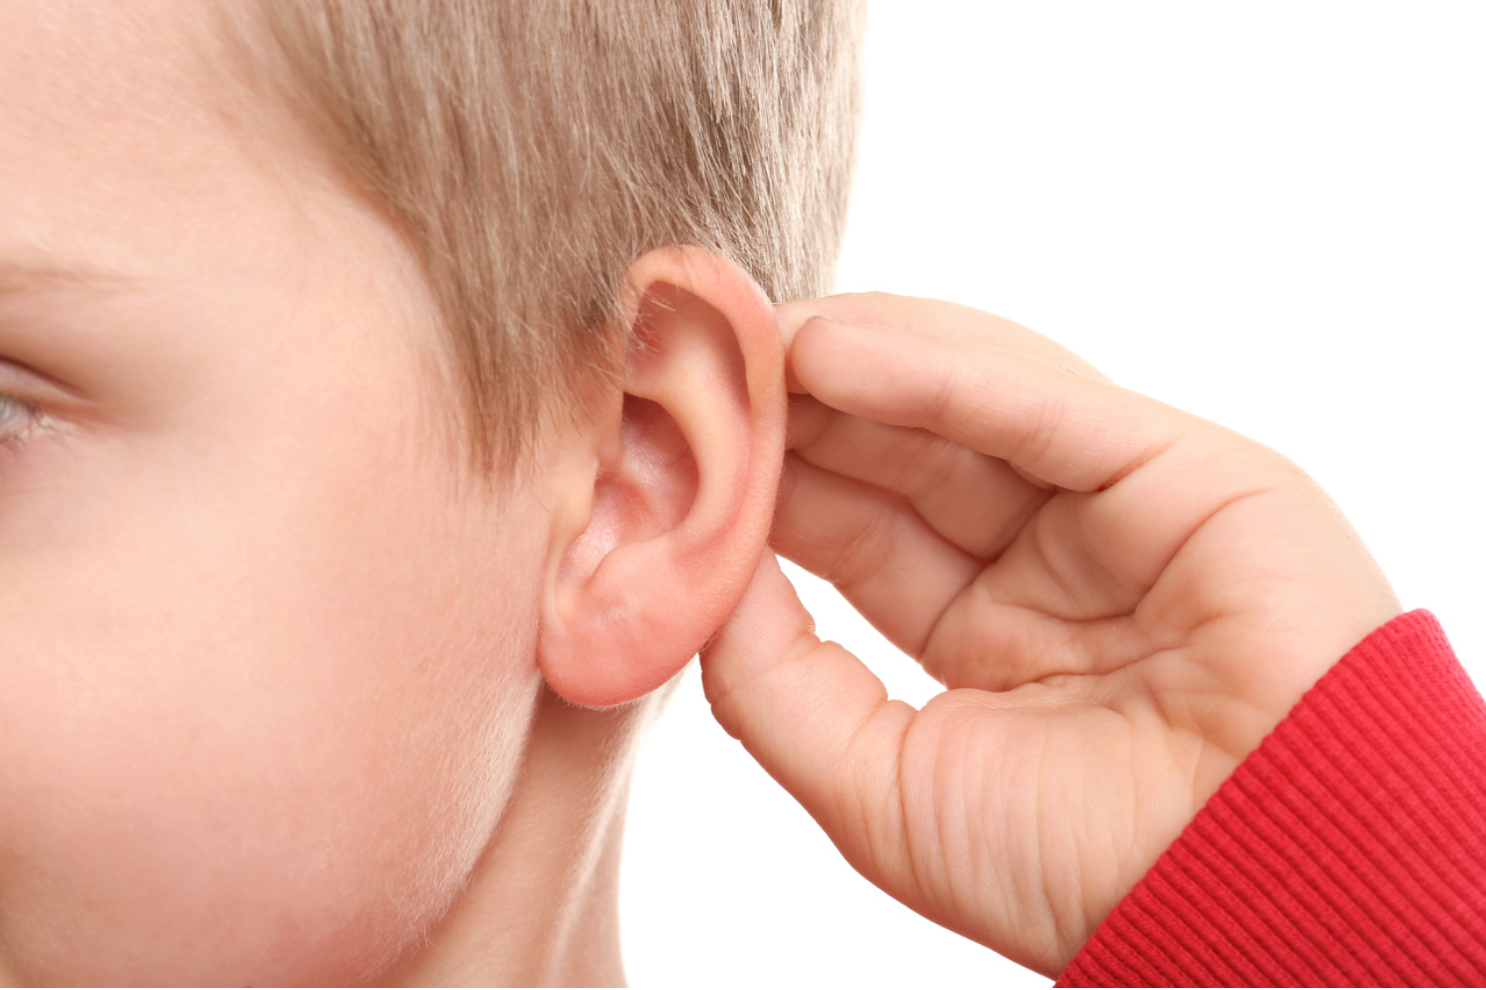 Children Under 5 Years of Age Face Higher Risk of Hearing Loss Related to Cancer Drug